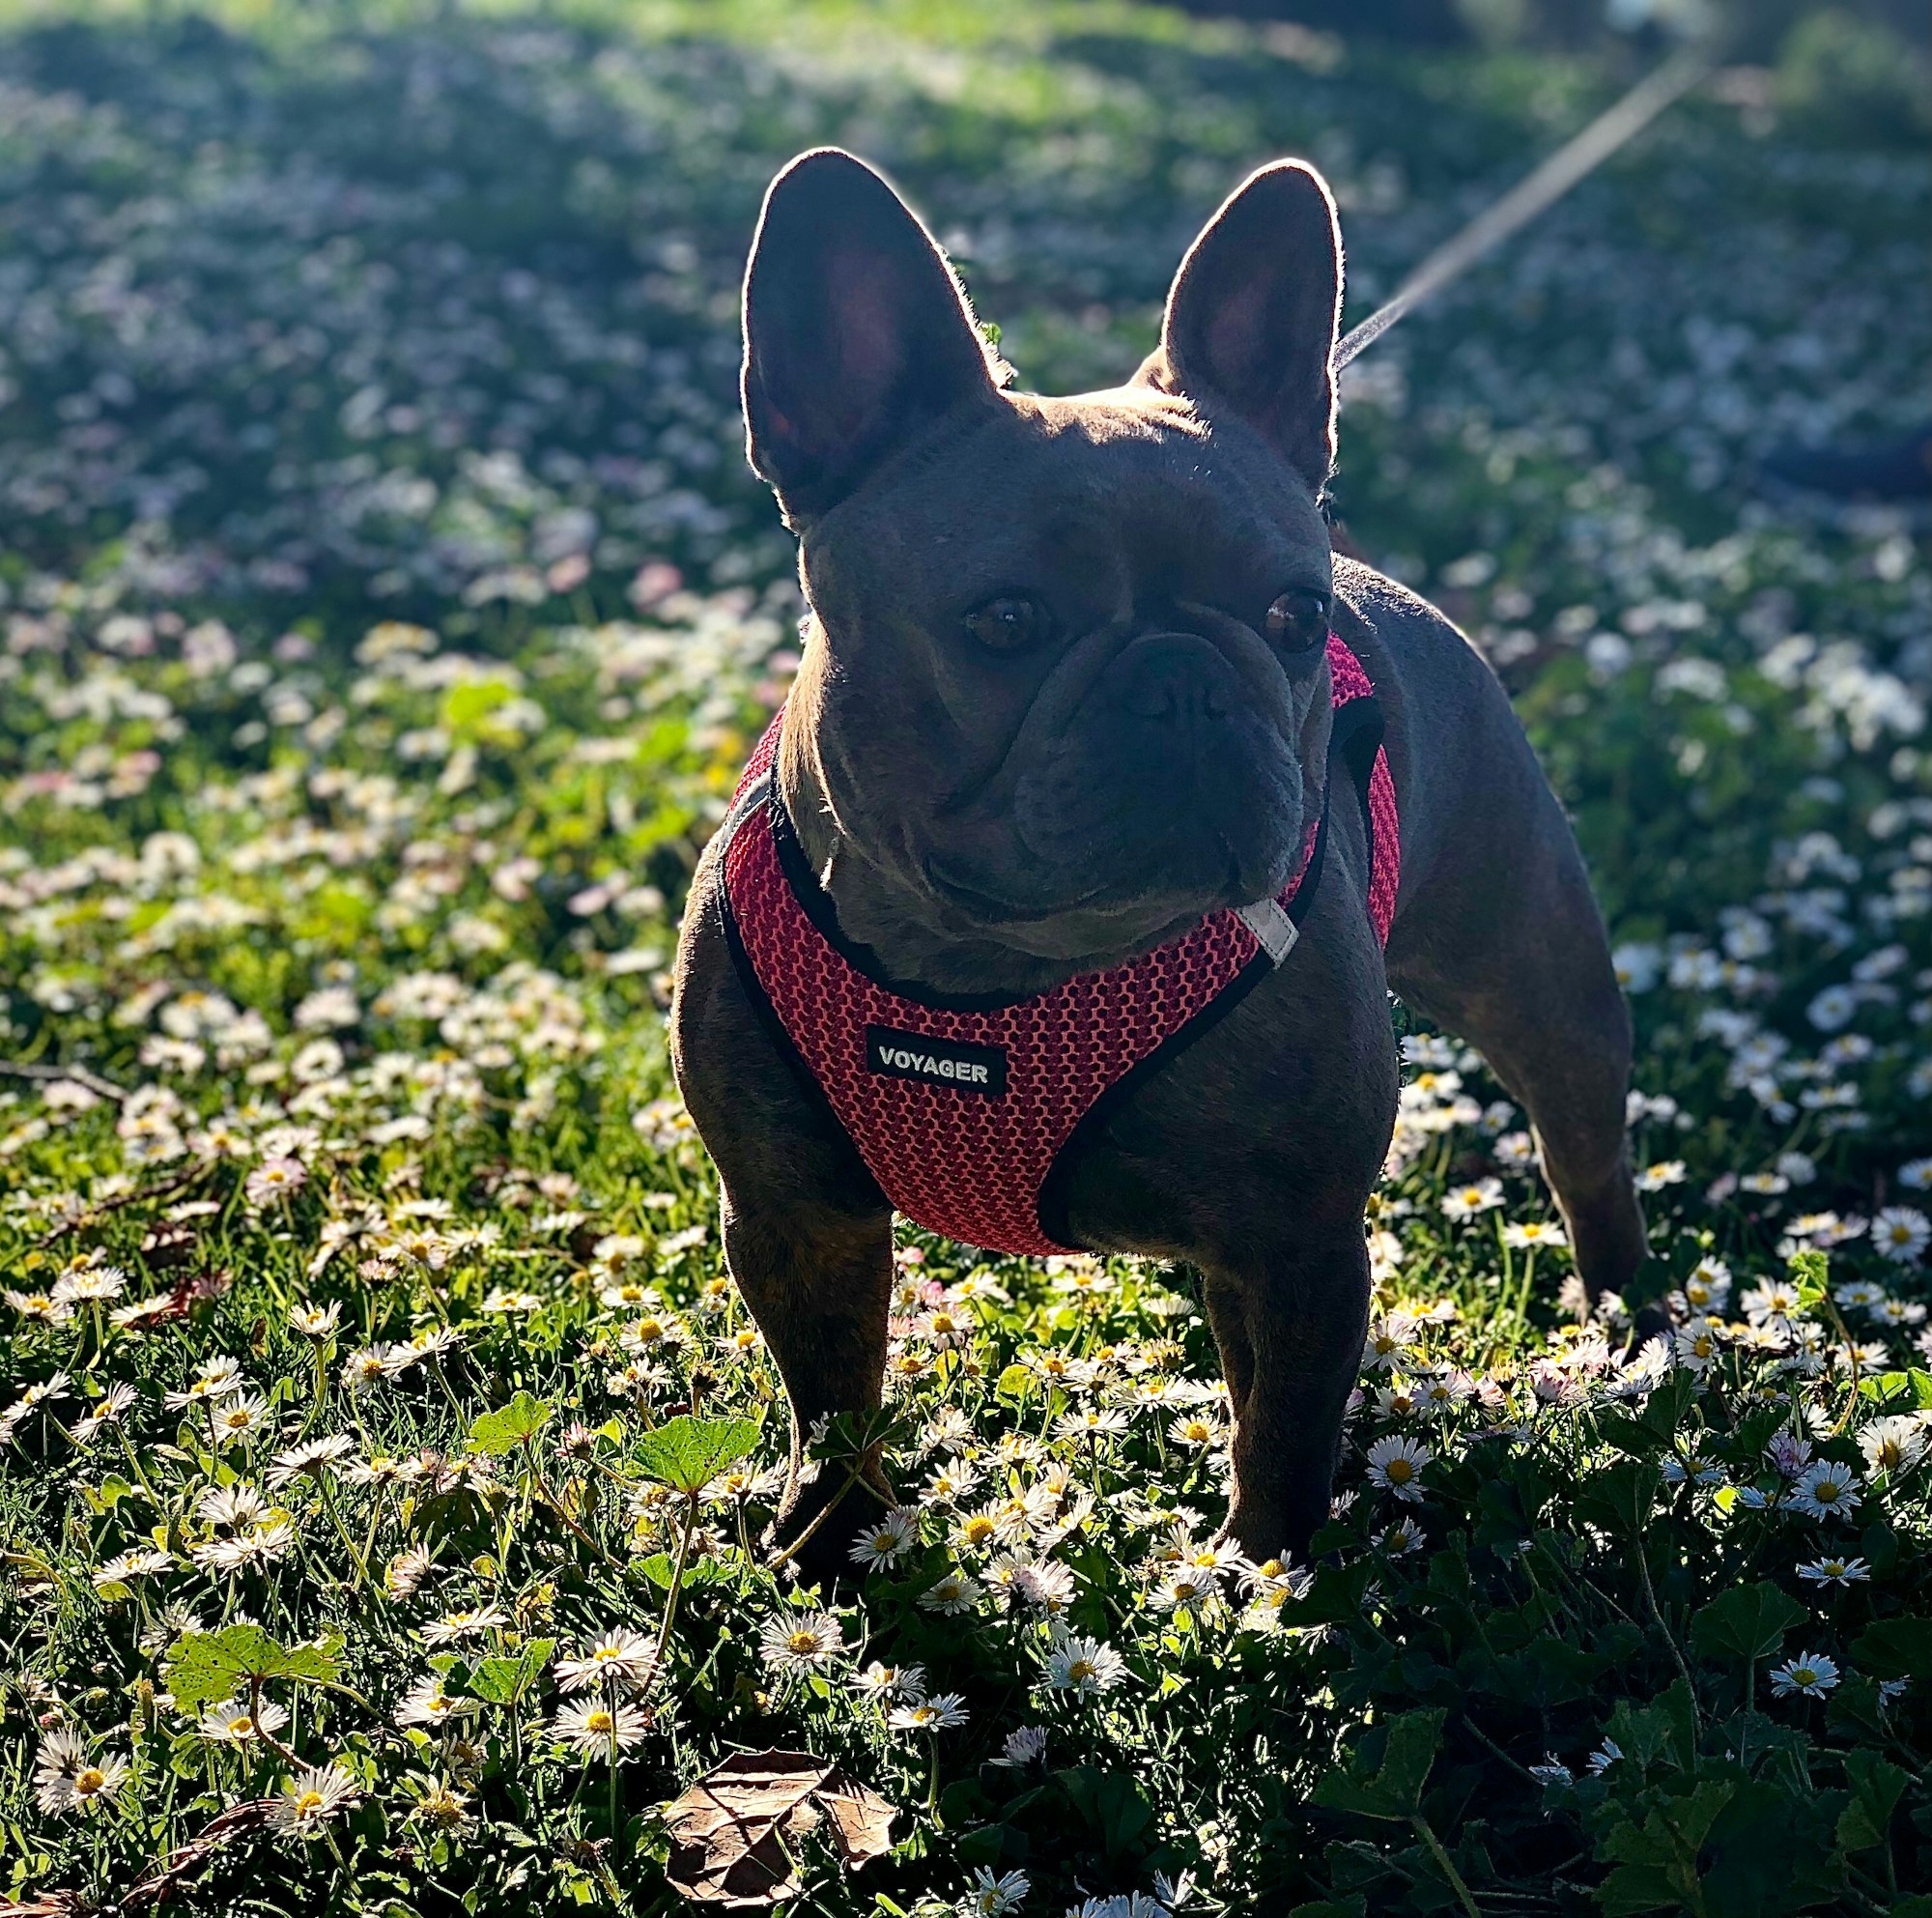 Blue brindle French bulldog with pink harness among field of flowers and grass during daytime